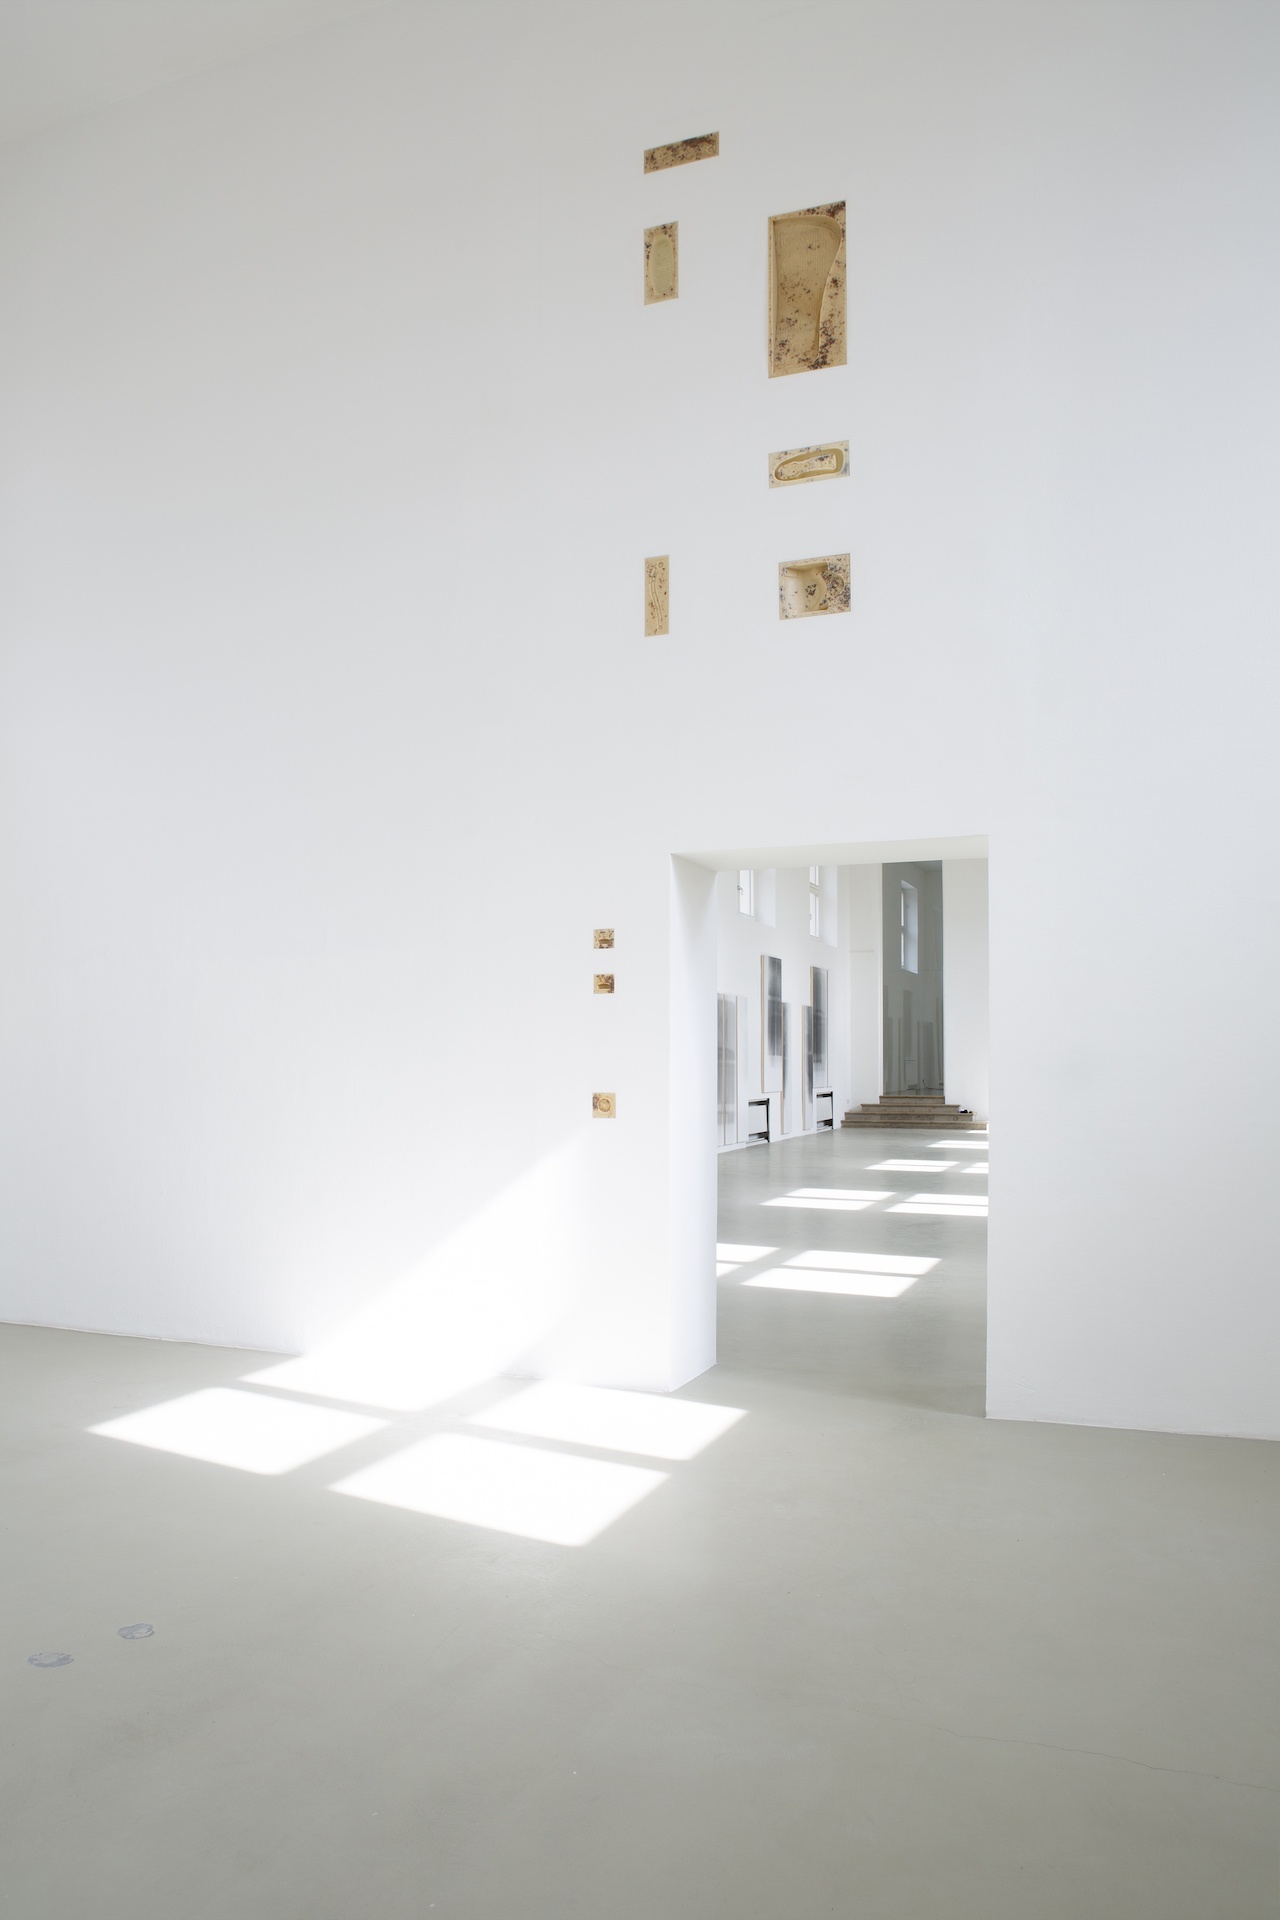 “Patricia L. Boyd: Hold,” Kunstverein München, March 9–May 9, 2021, installation view